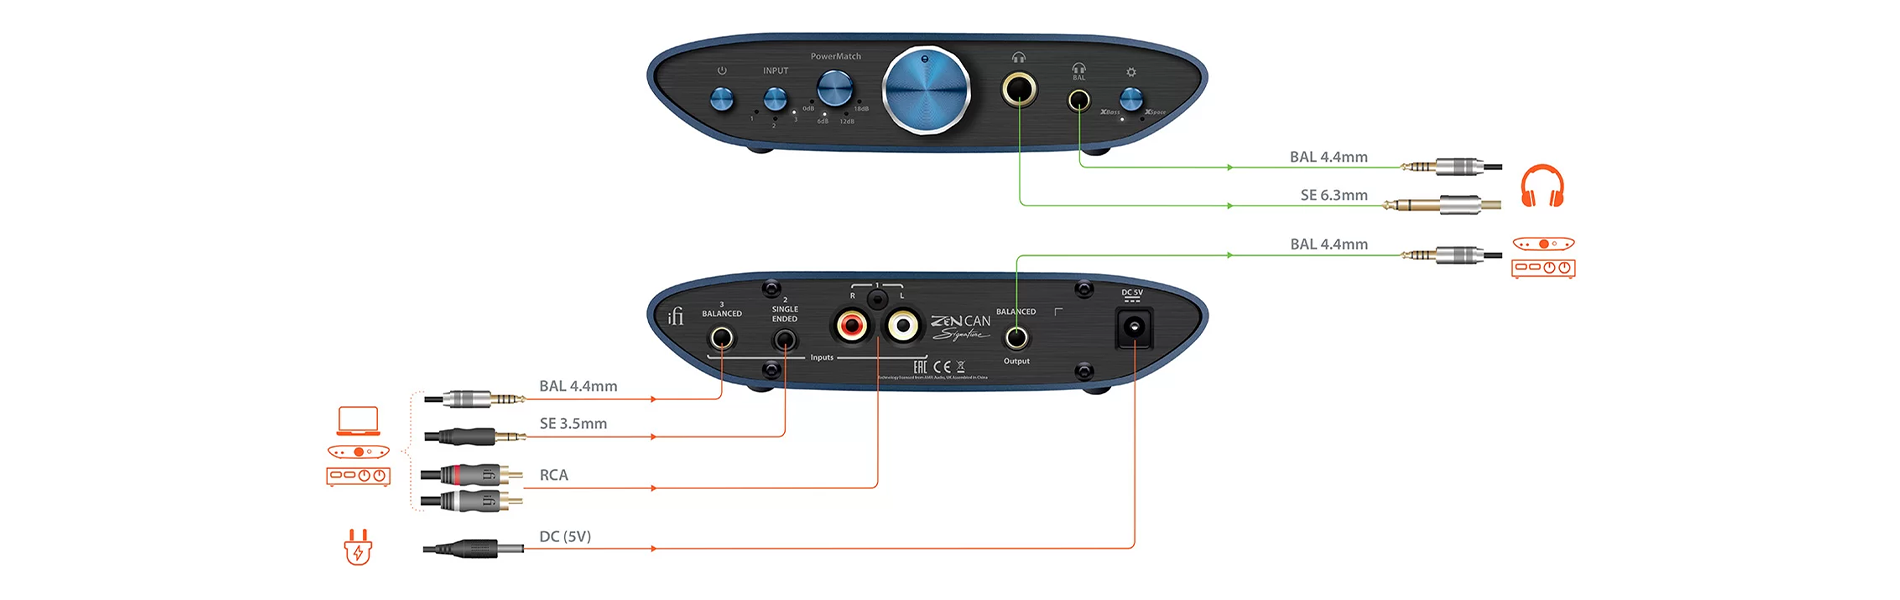 iFi ZEN Can Signature Limited Edition Connection Diagram